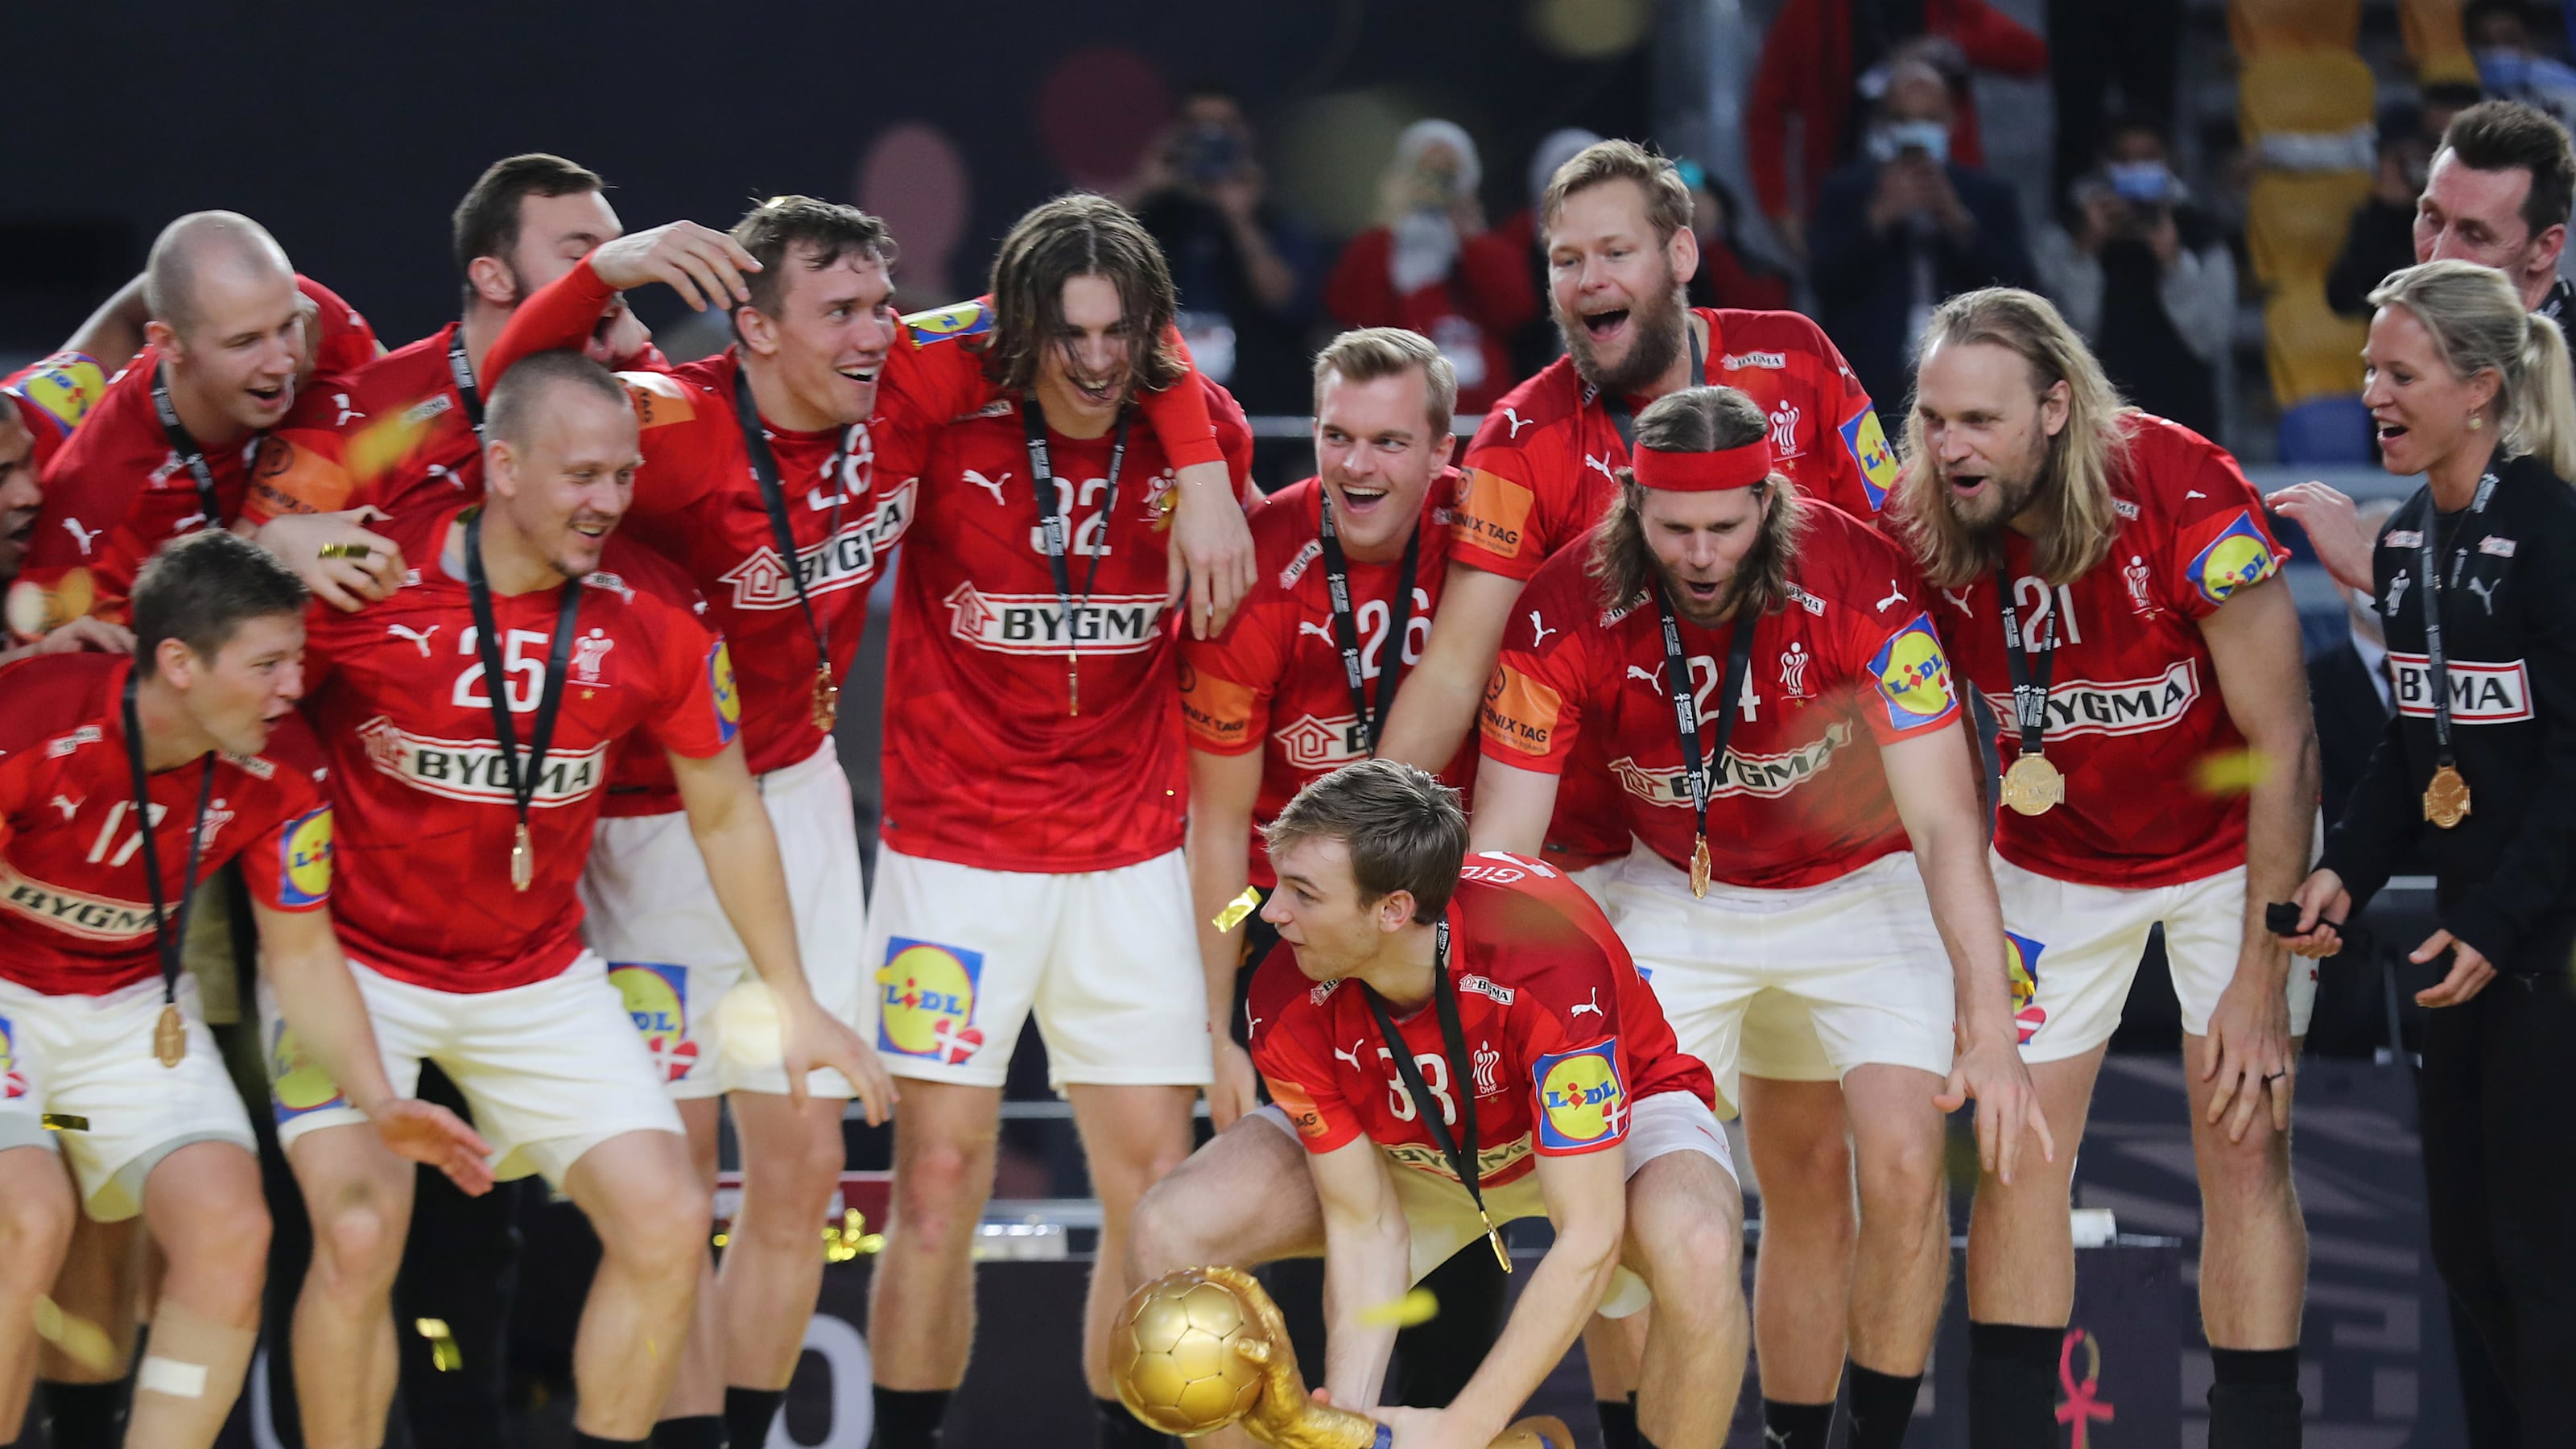 Handball world championships 2021: defeat Sweden to claim second straight title